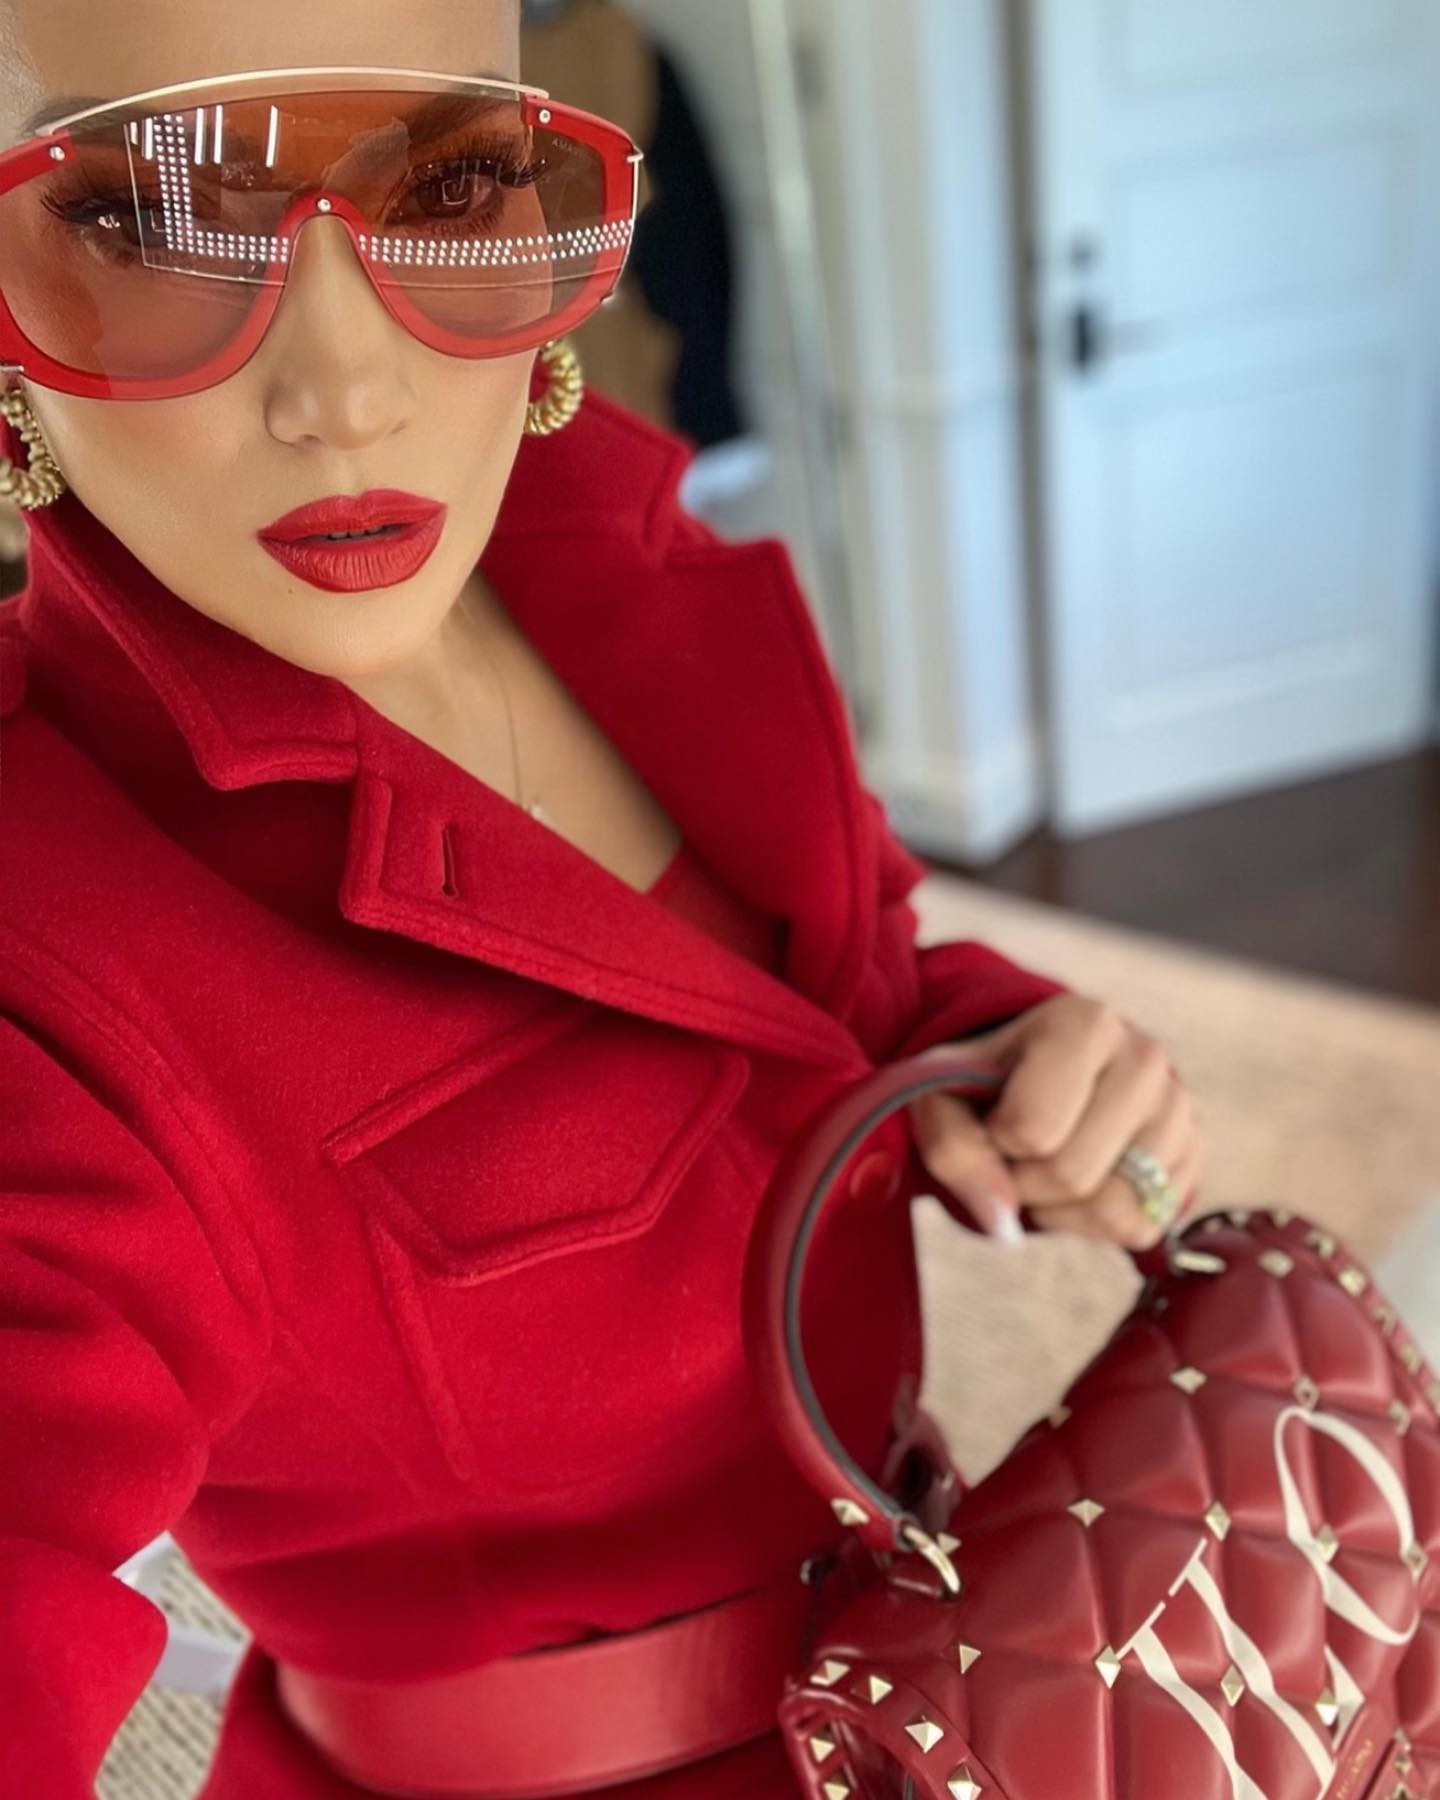 Jennifer Lopez Pairs a Sporty Look with Oversized Versace Shades